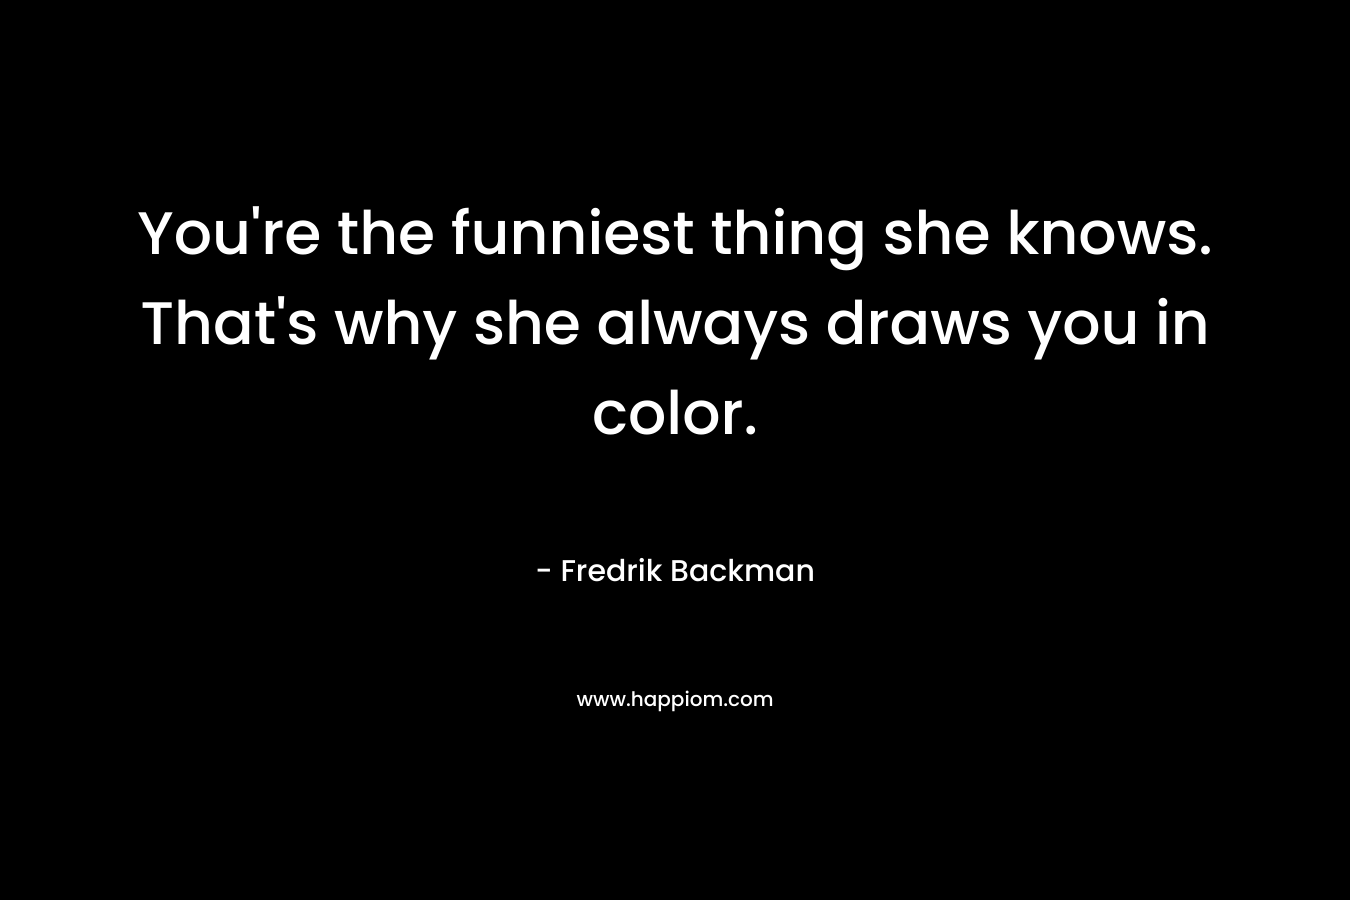 You’re the funniest thing she knows. That’s why she always draws you in color. – Fredrik Backman